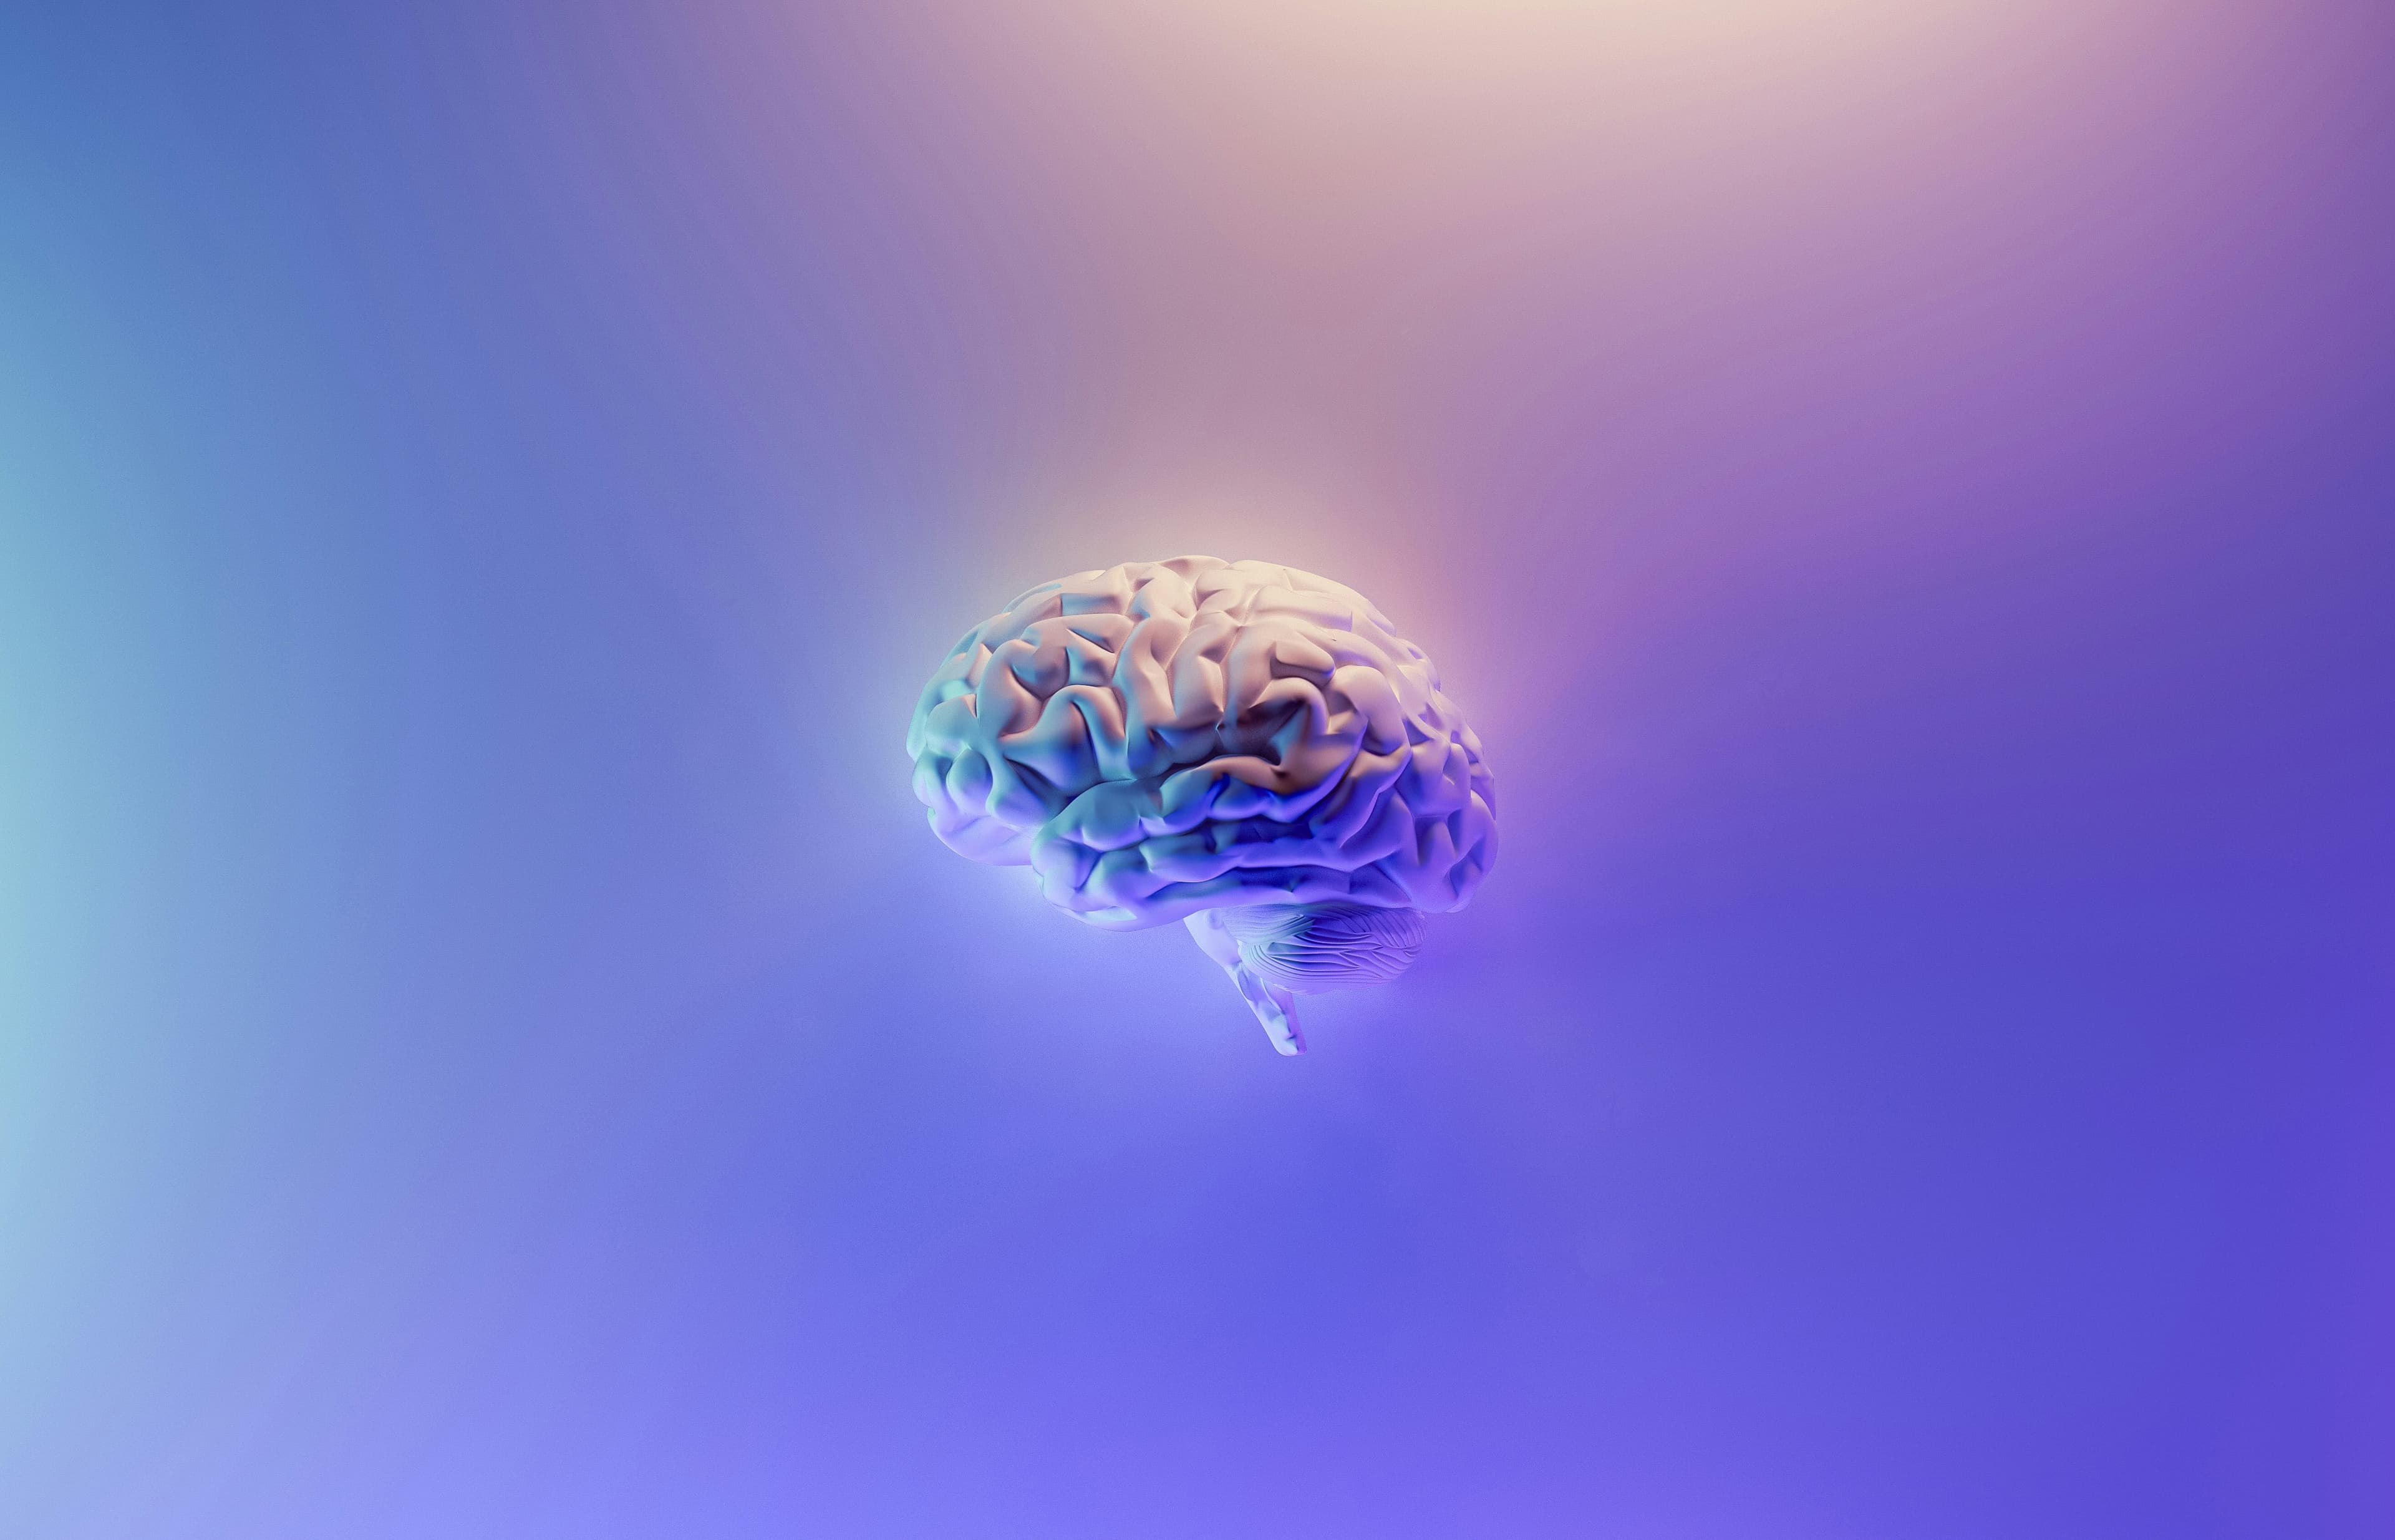 A 3D Rendered Brain On a Blue-ish Background